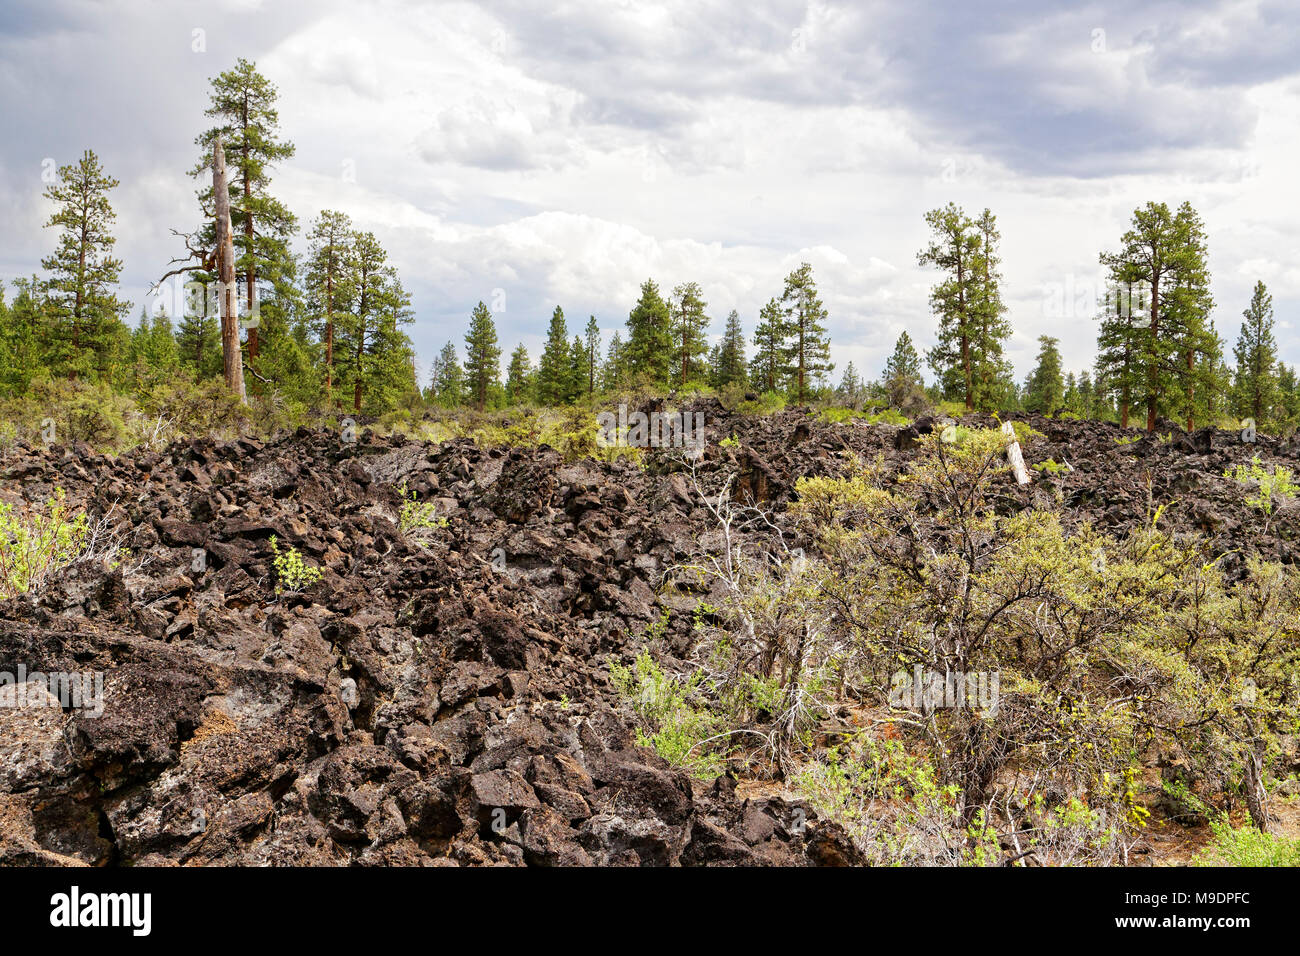 42,885.03031 a dramatic dry ancient lava flow landscape demonstrates the tenacity and rugged growth ability Ponderosa pine and Curl leaf Mt Mahogany Stock Photo